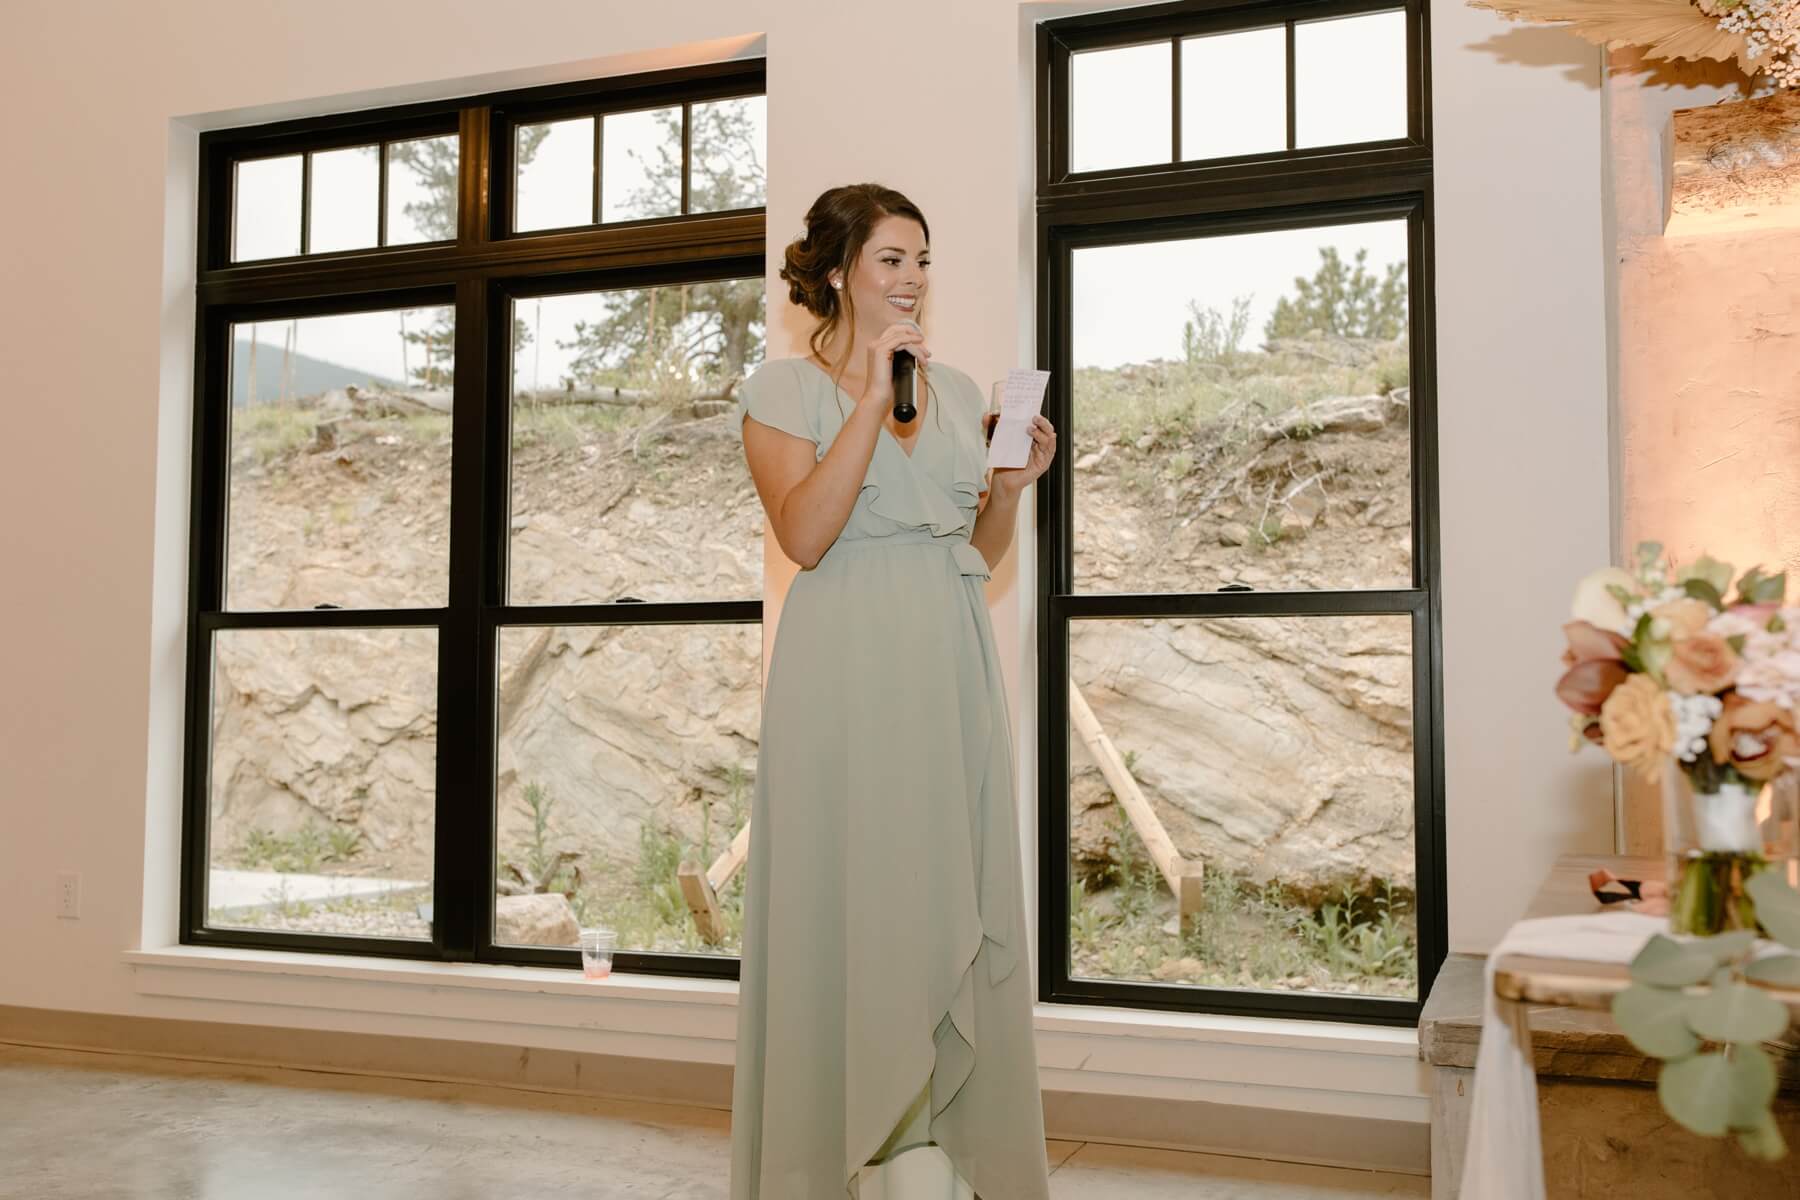 Maid of honor wearing mint green dress and giving speech